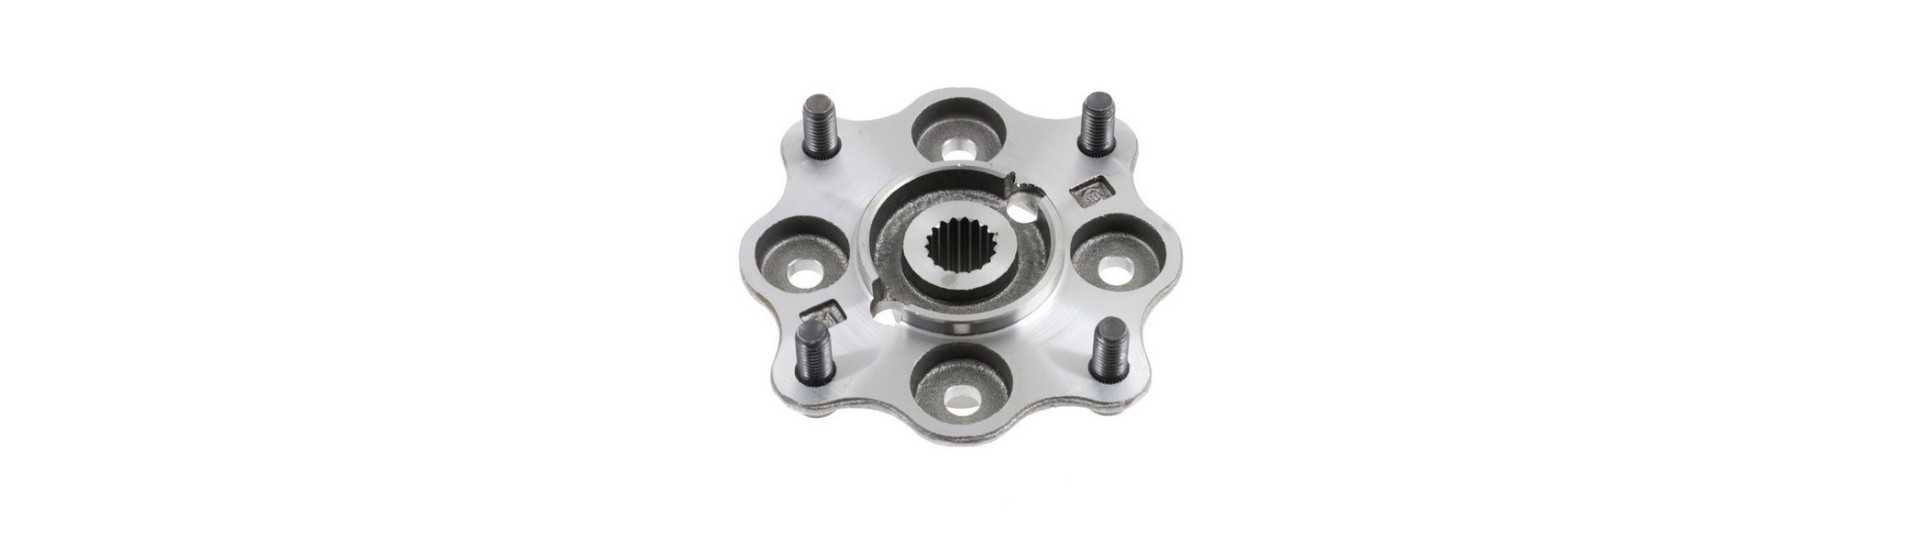 Wheel hub at the best price for car without a permit